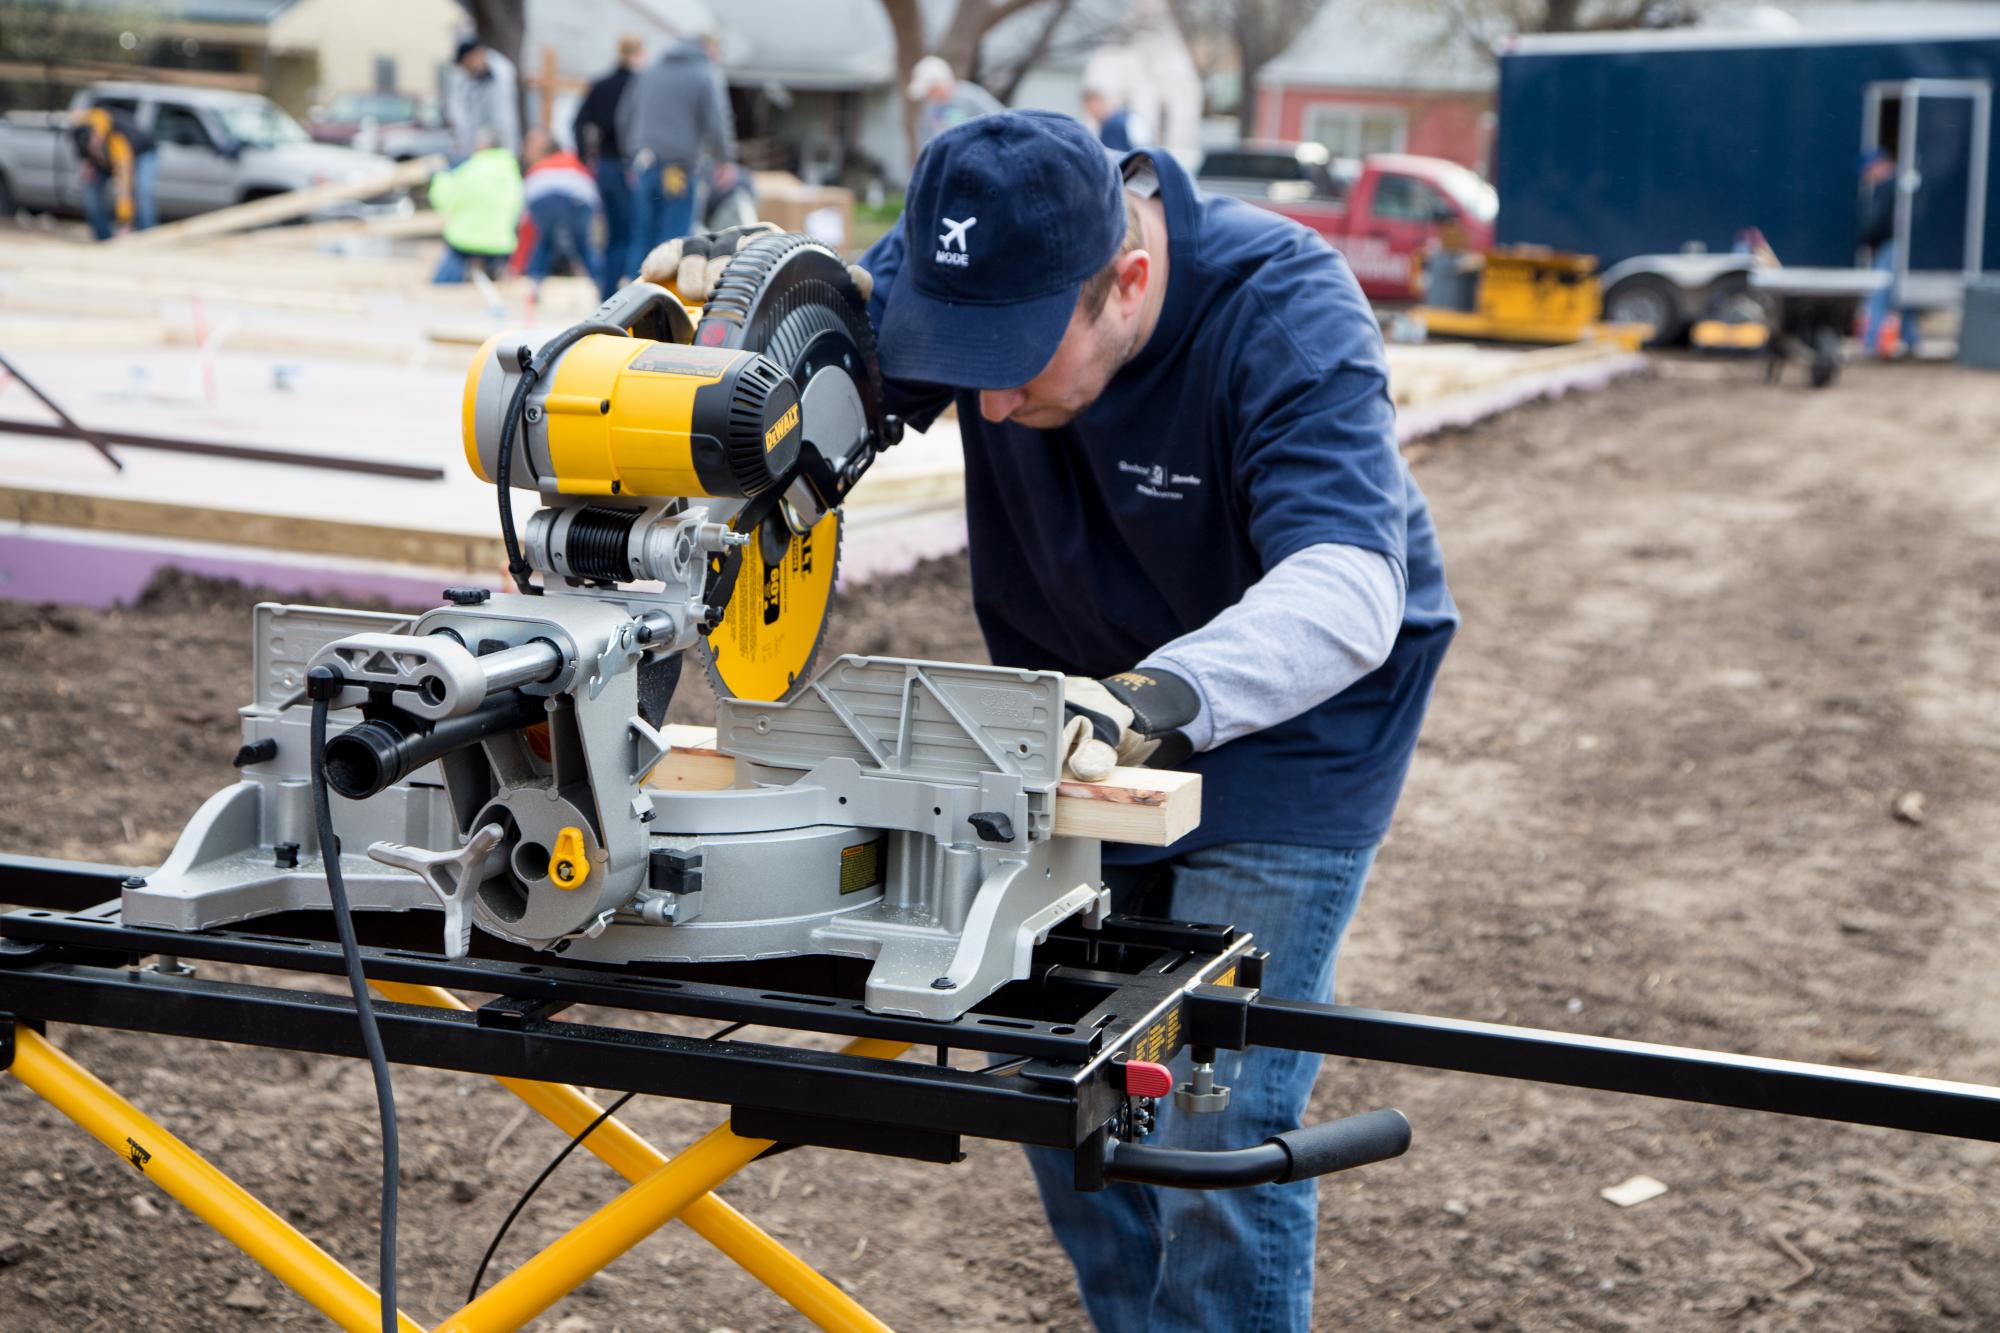 Textron Aviation employee volunteers for the Habitat for Humanity Air Capital Build in Wichita Kansas 2019